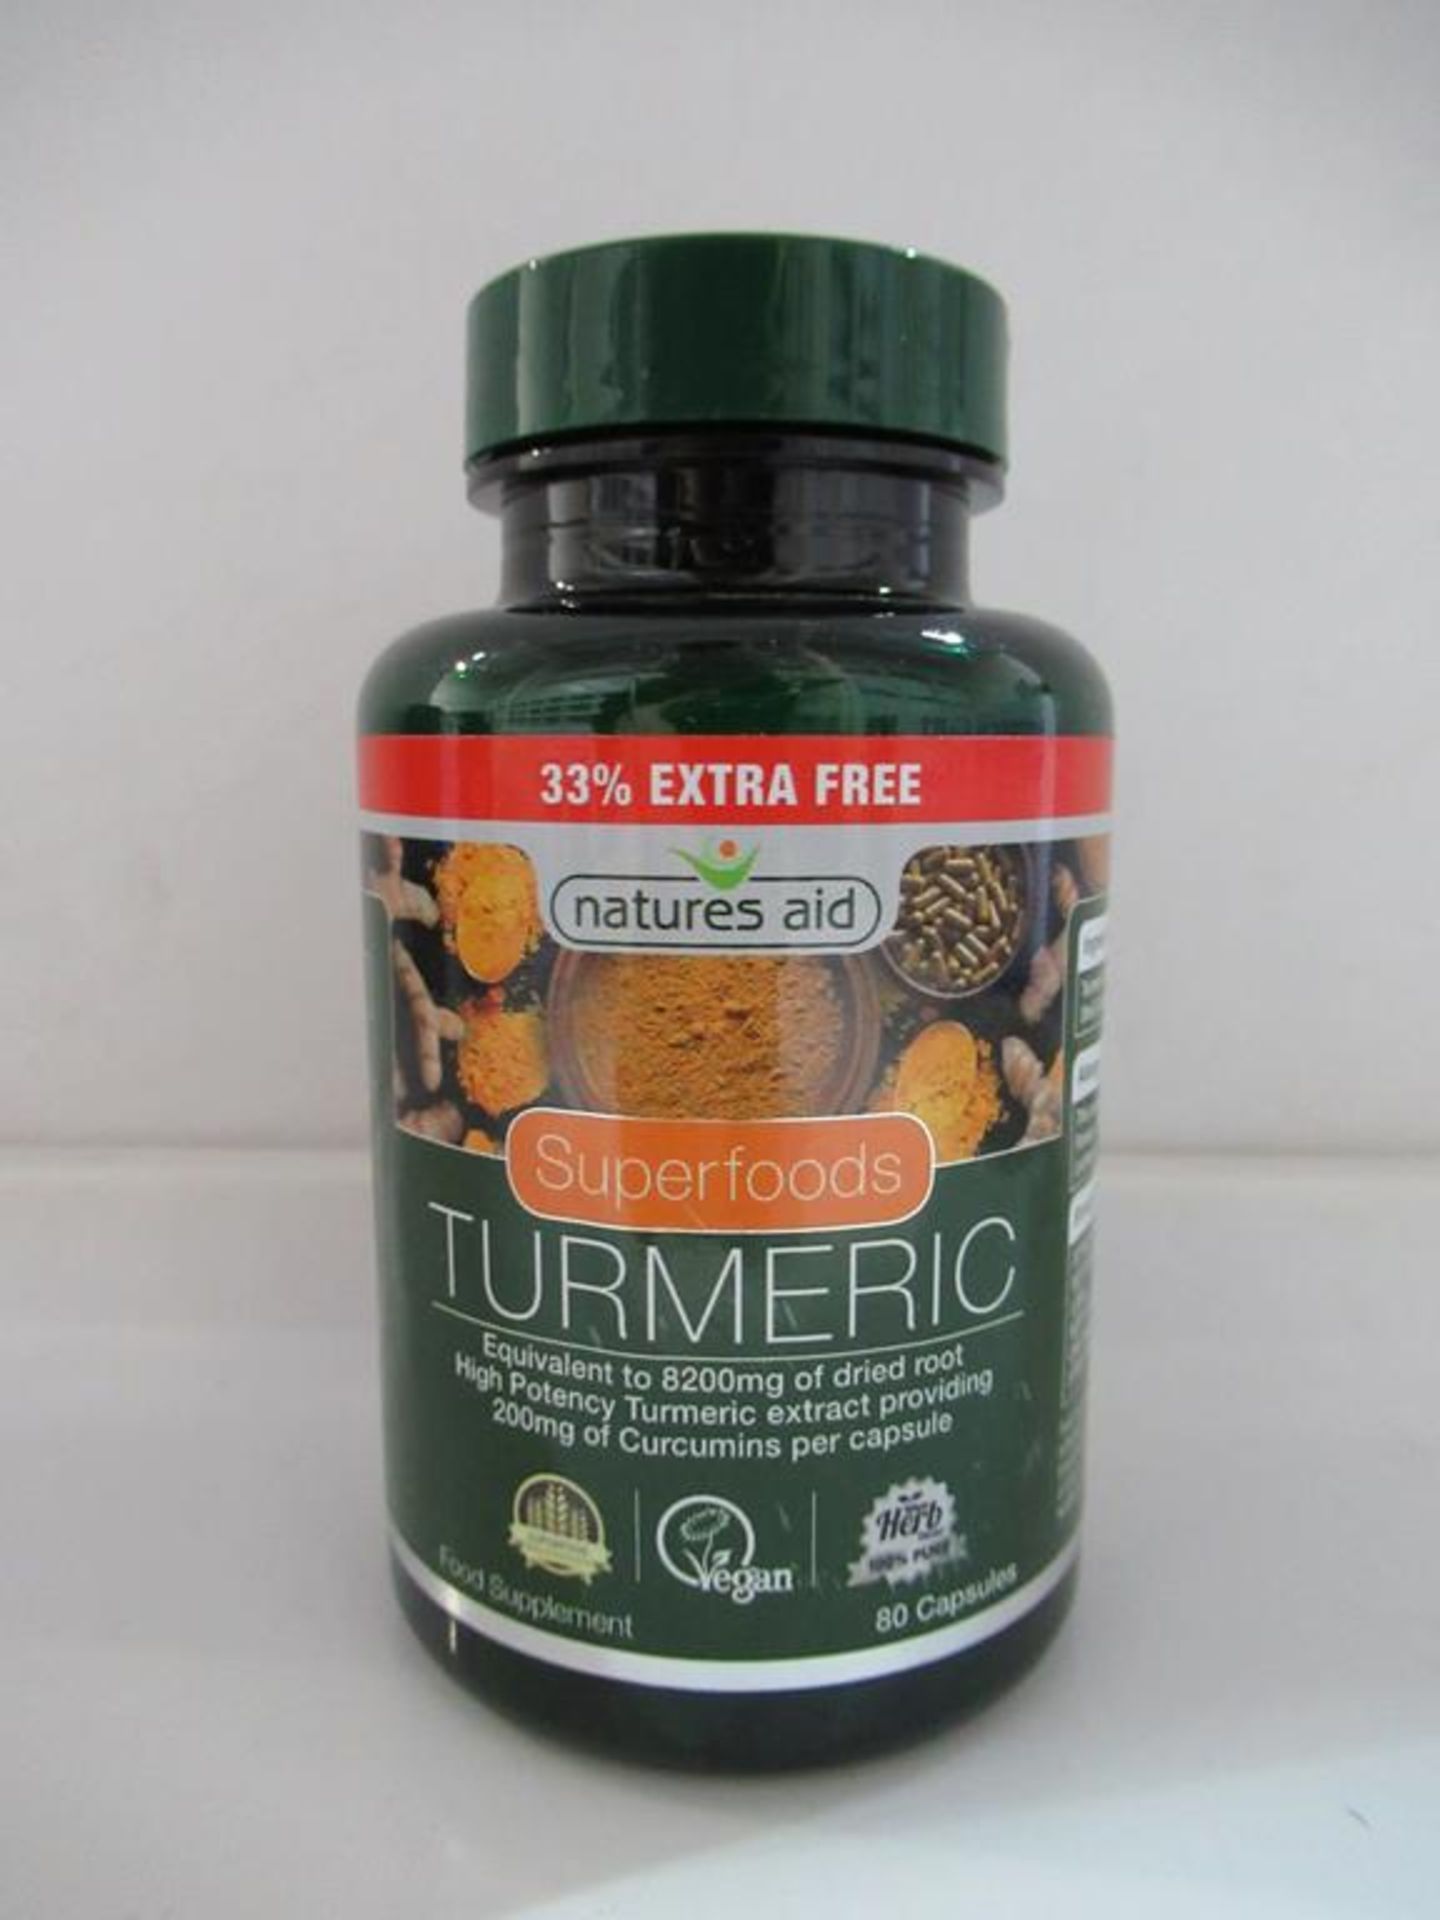 11 x Natures Aid Supplements - Image 4 of 8